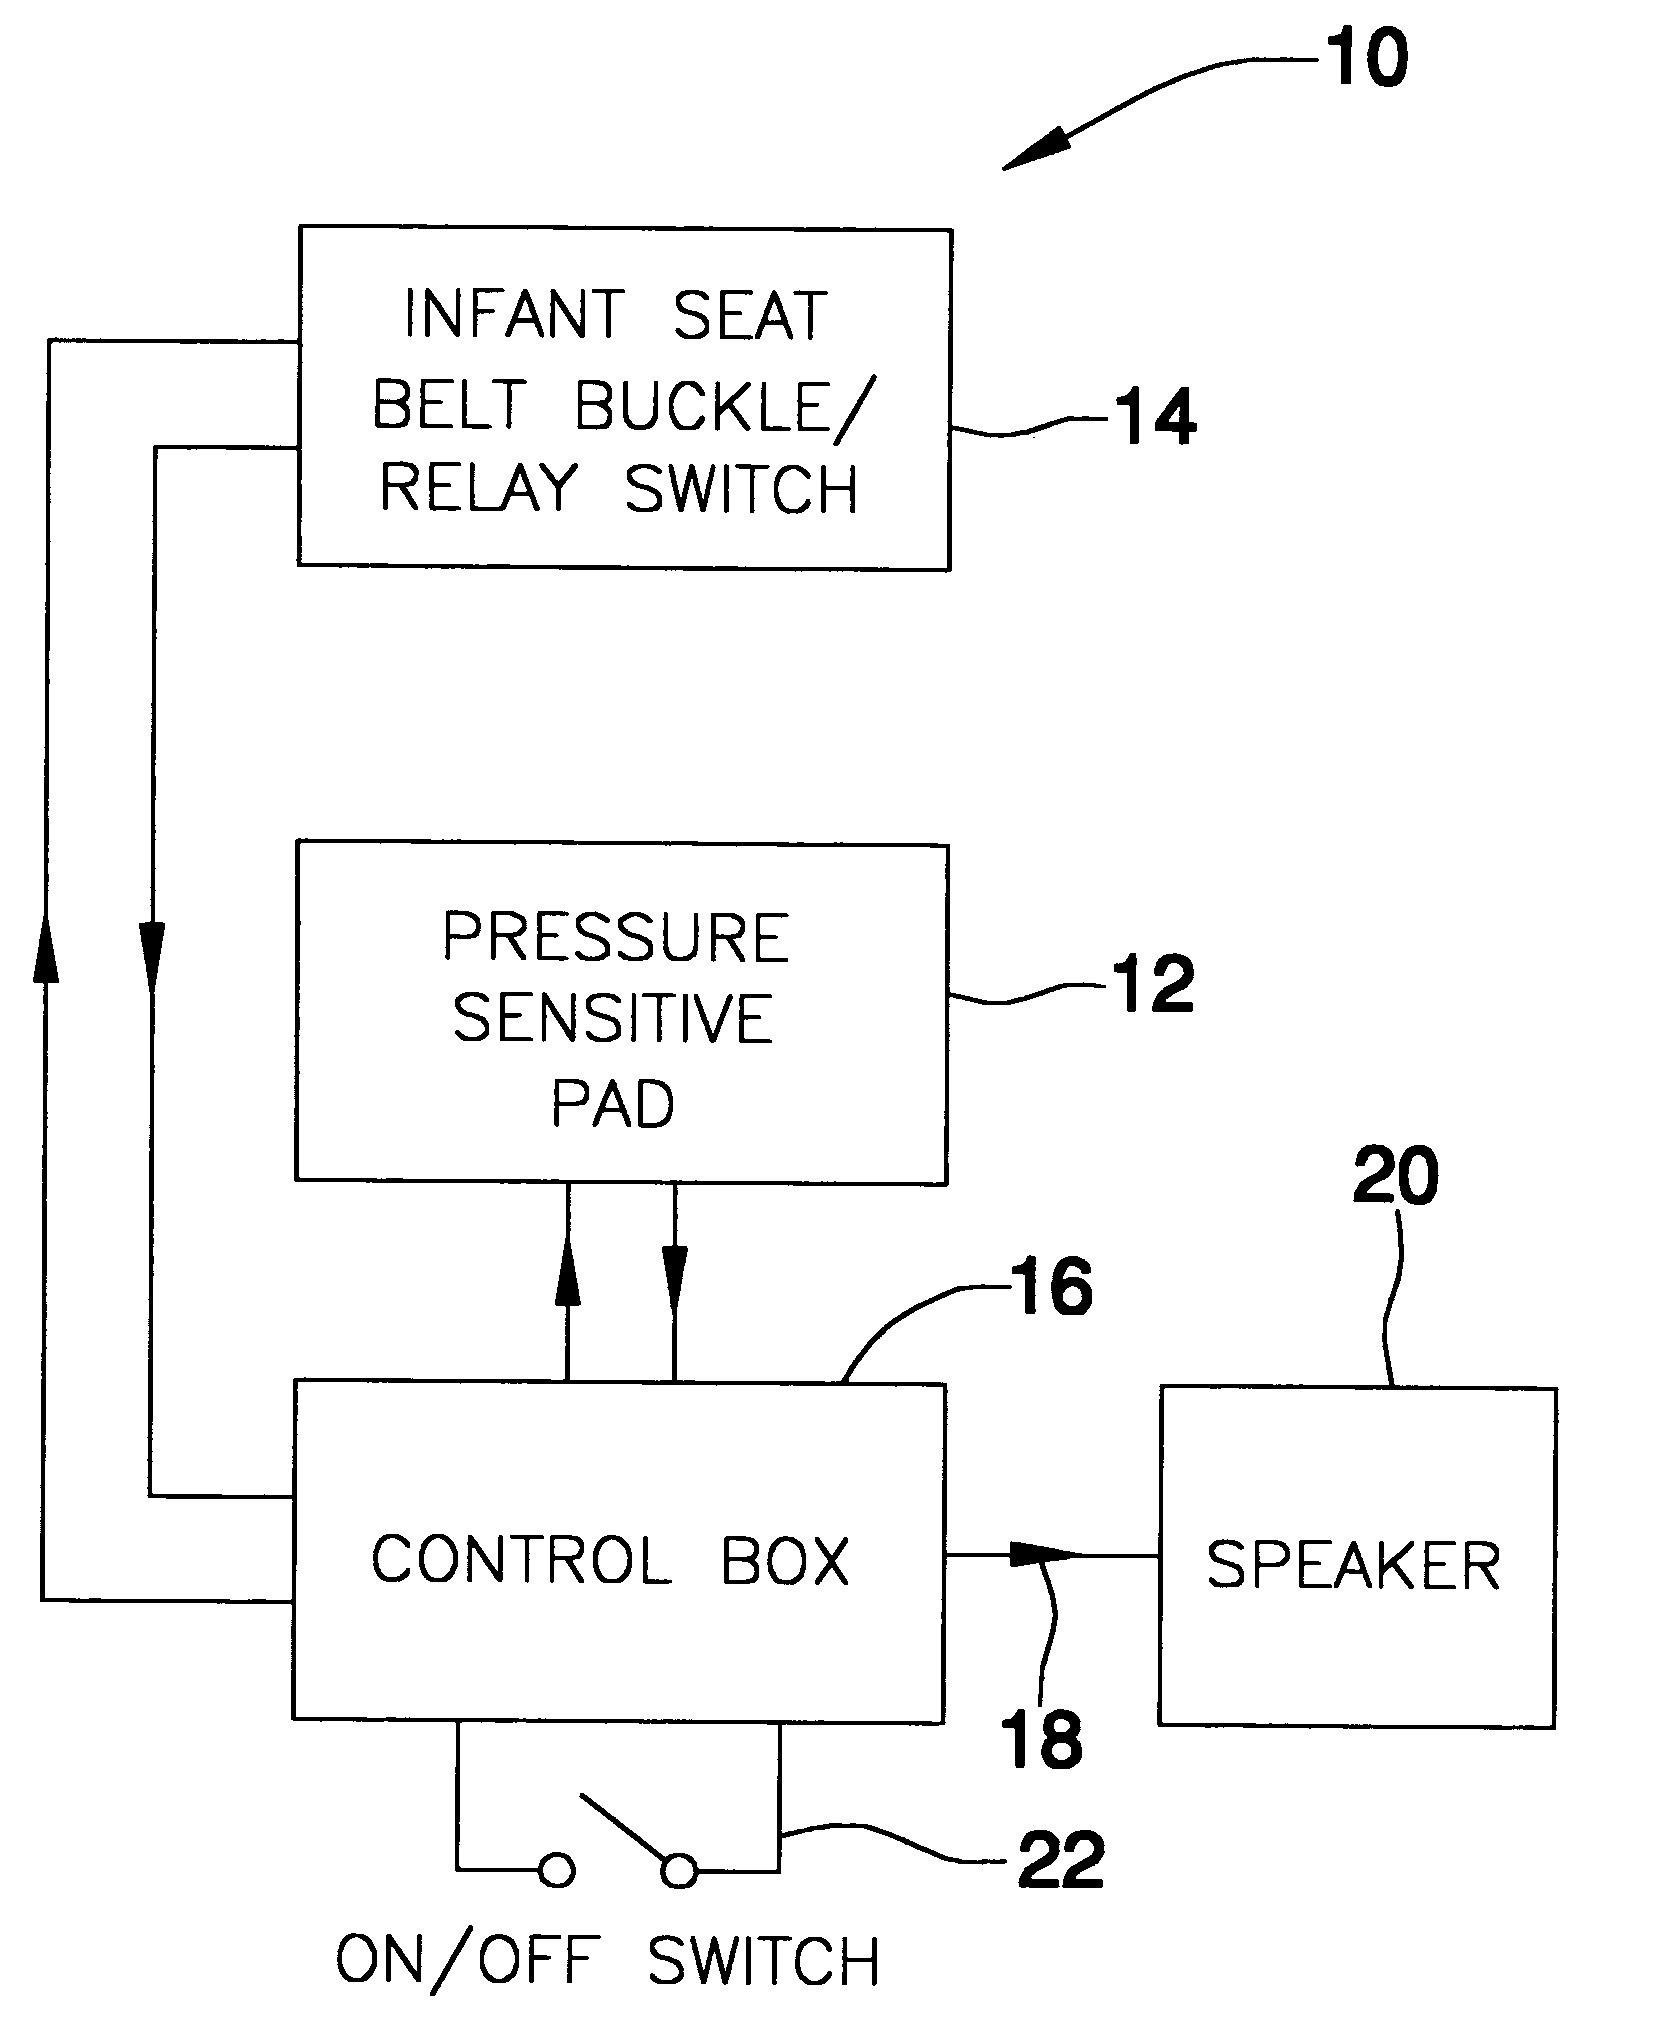 Infant alarm system for an automobile